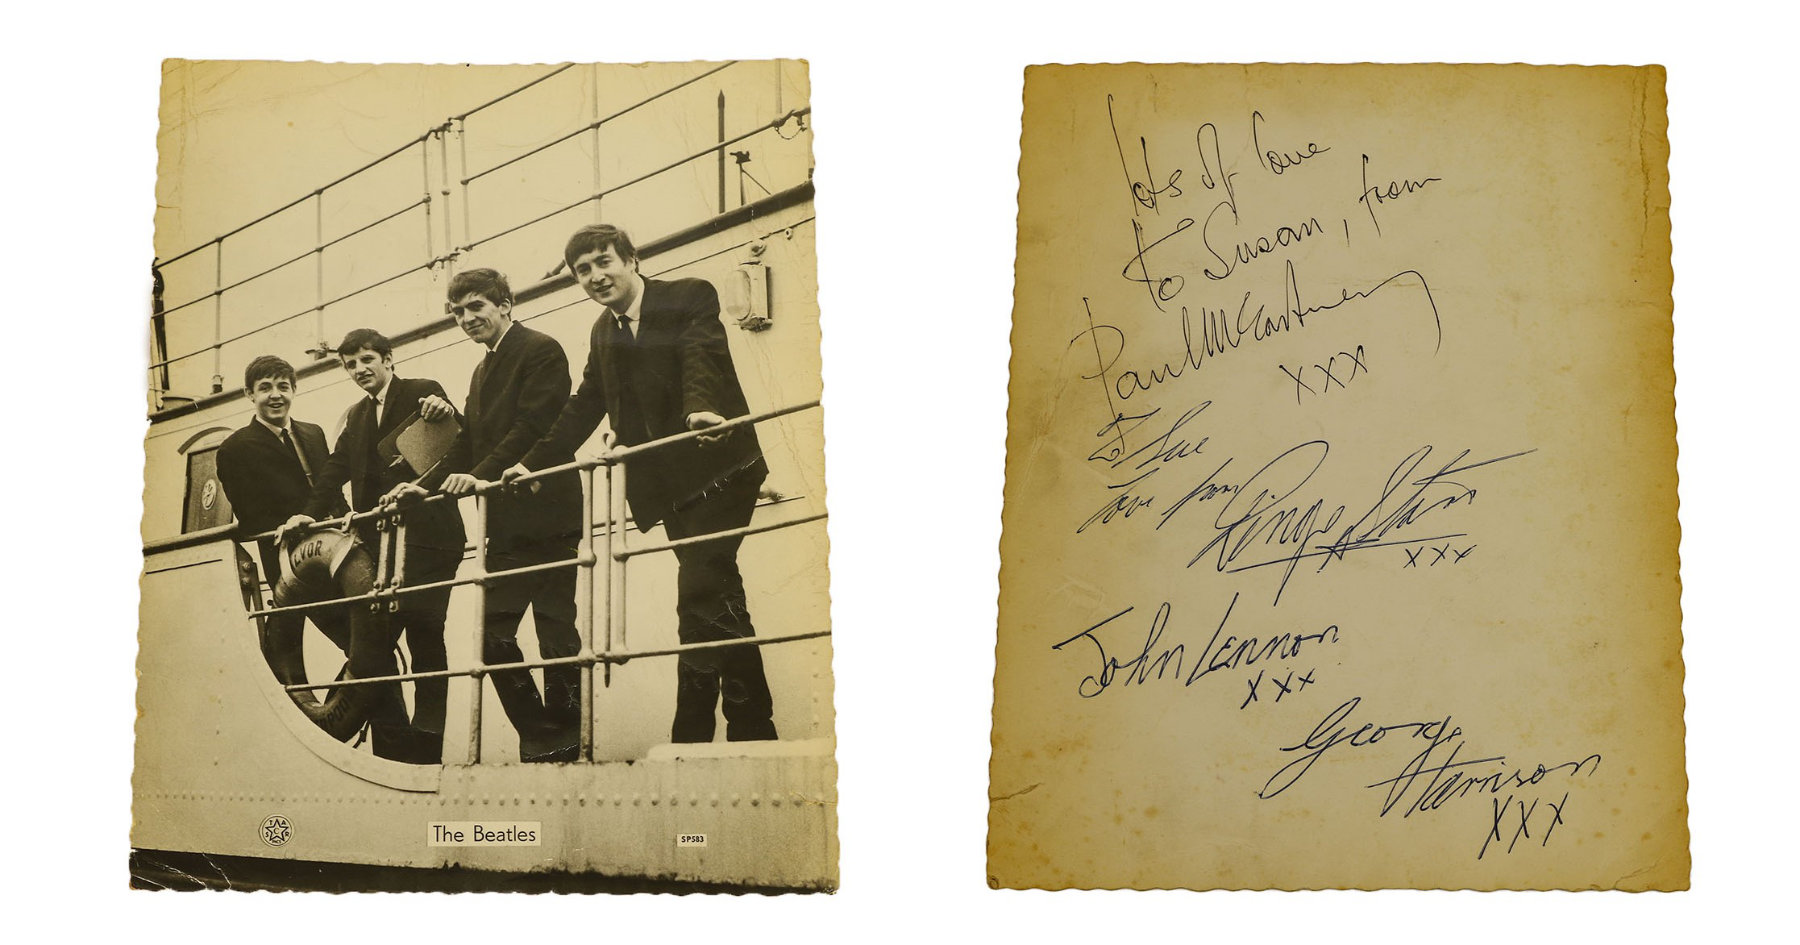 Autographs of Paul McCartney and Ringo Starr - Sold for £950